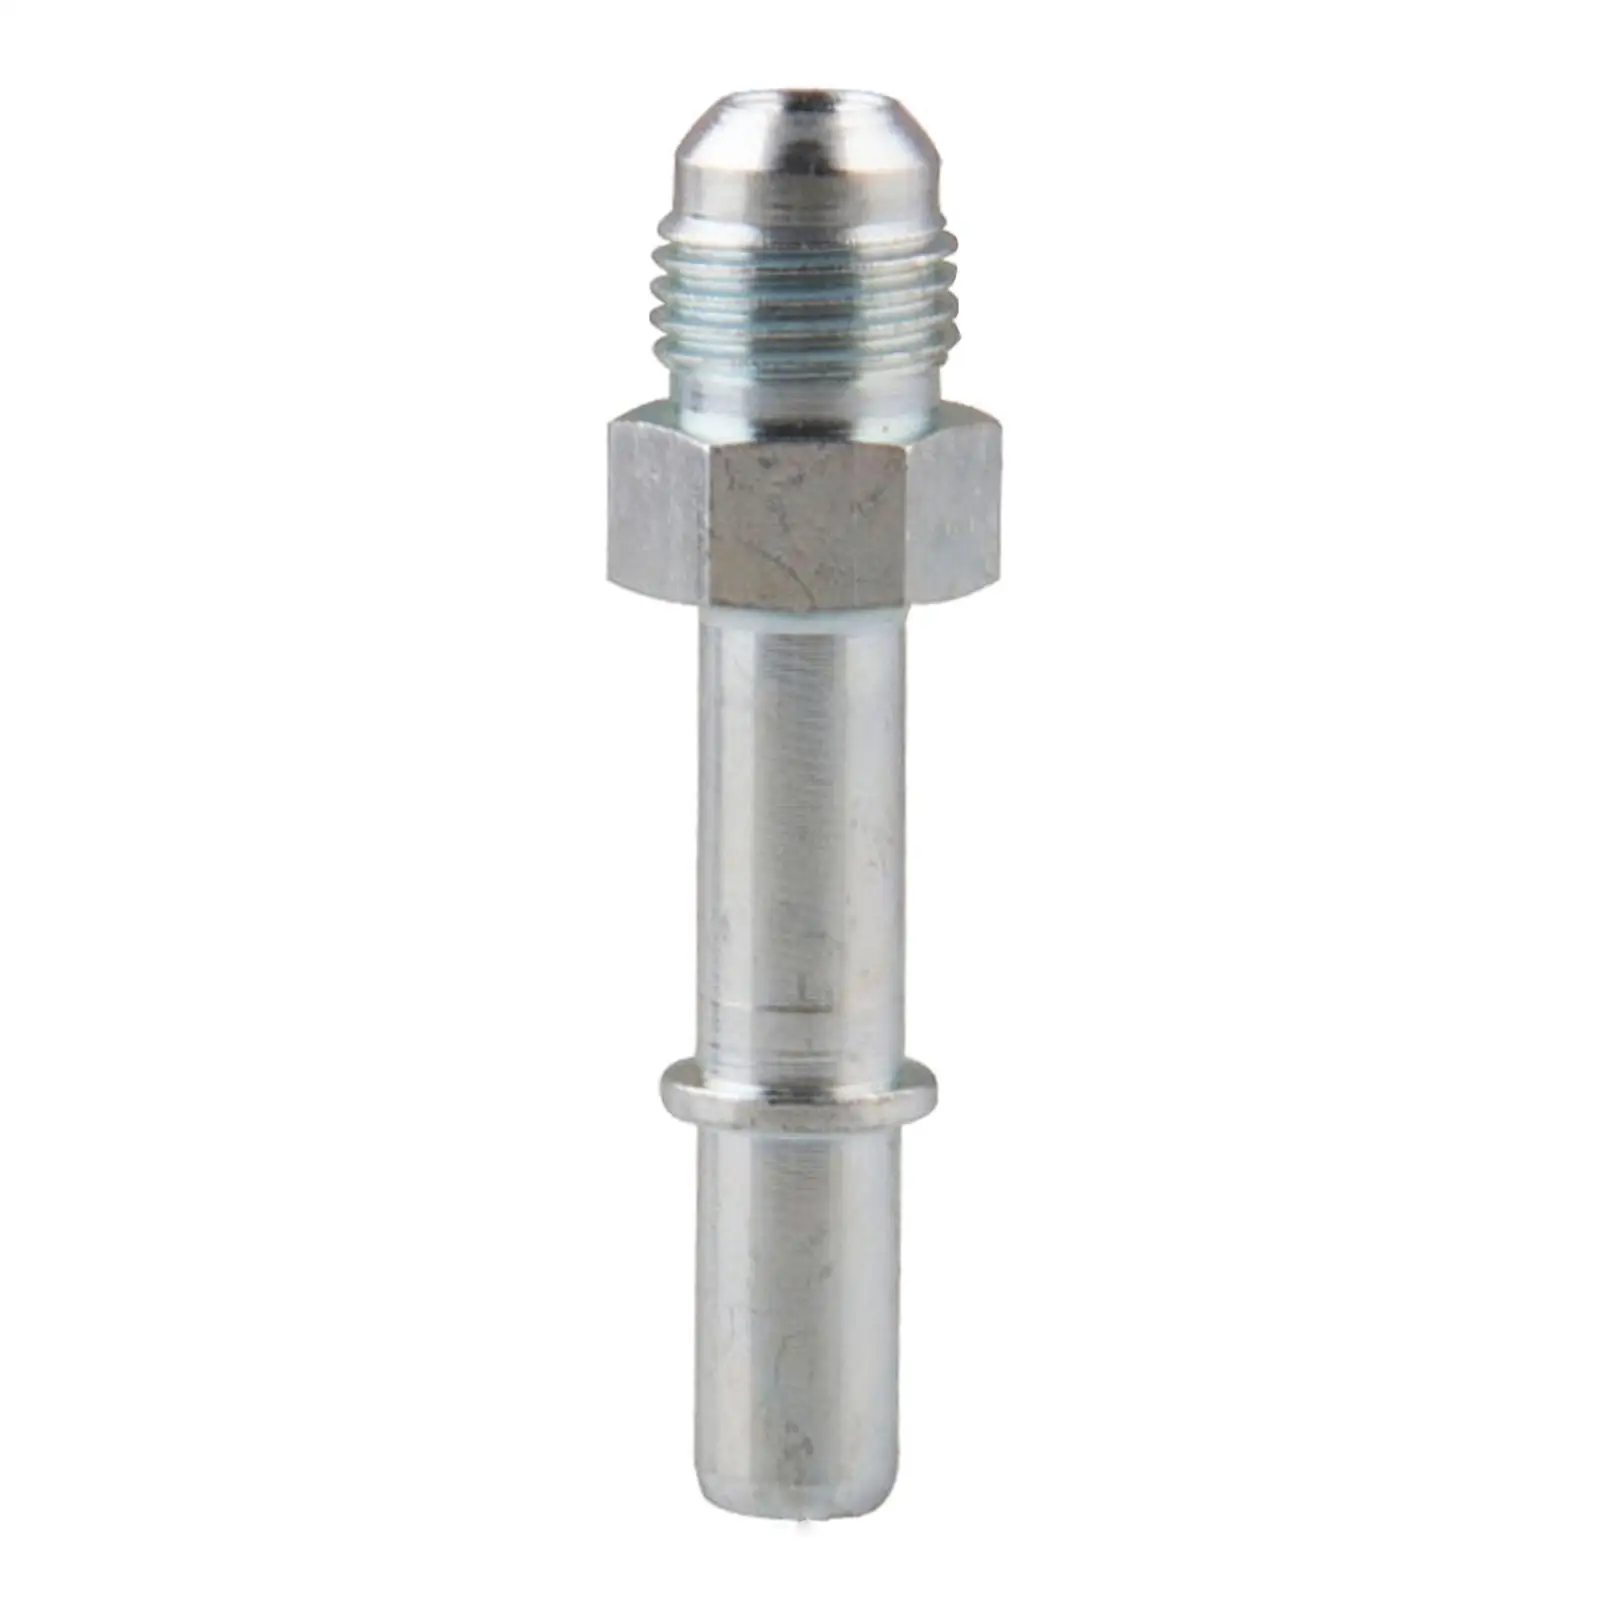 Heavy-duty Oil End Fitting Converter CNC Precision Machining Leak-free, Durable to Use and Operate